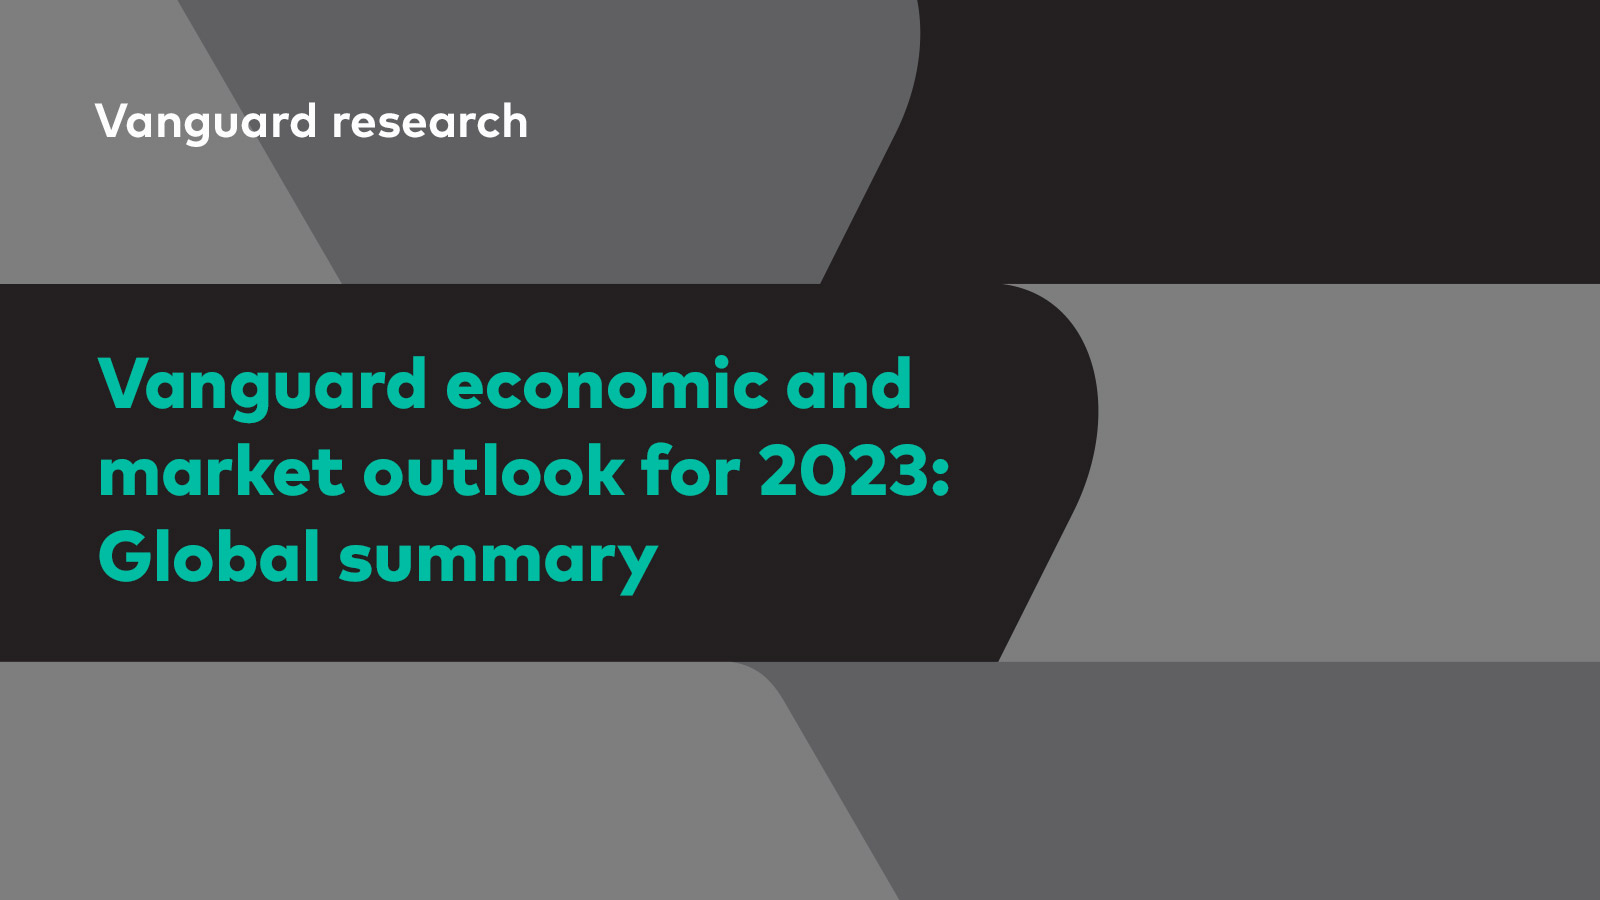 The global outlook summary highlights the toplevel findings of Vanguard’s full economic and